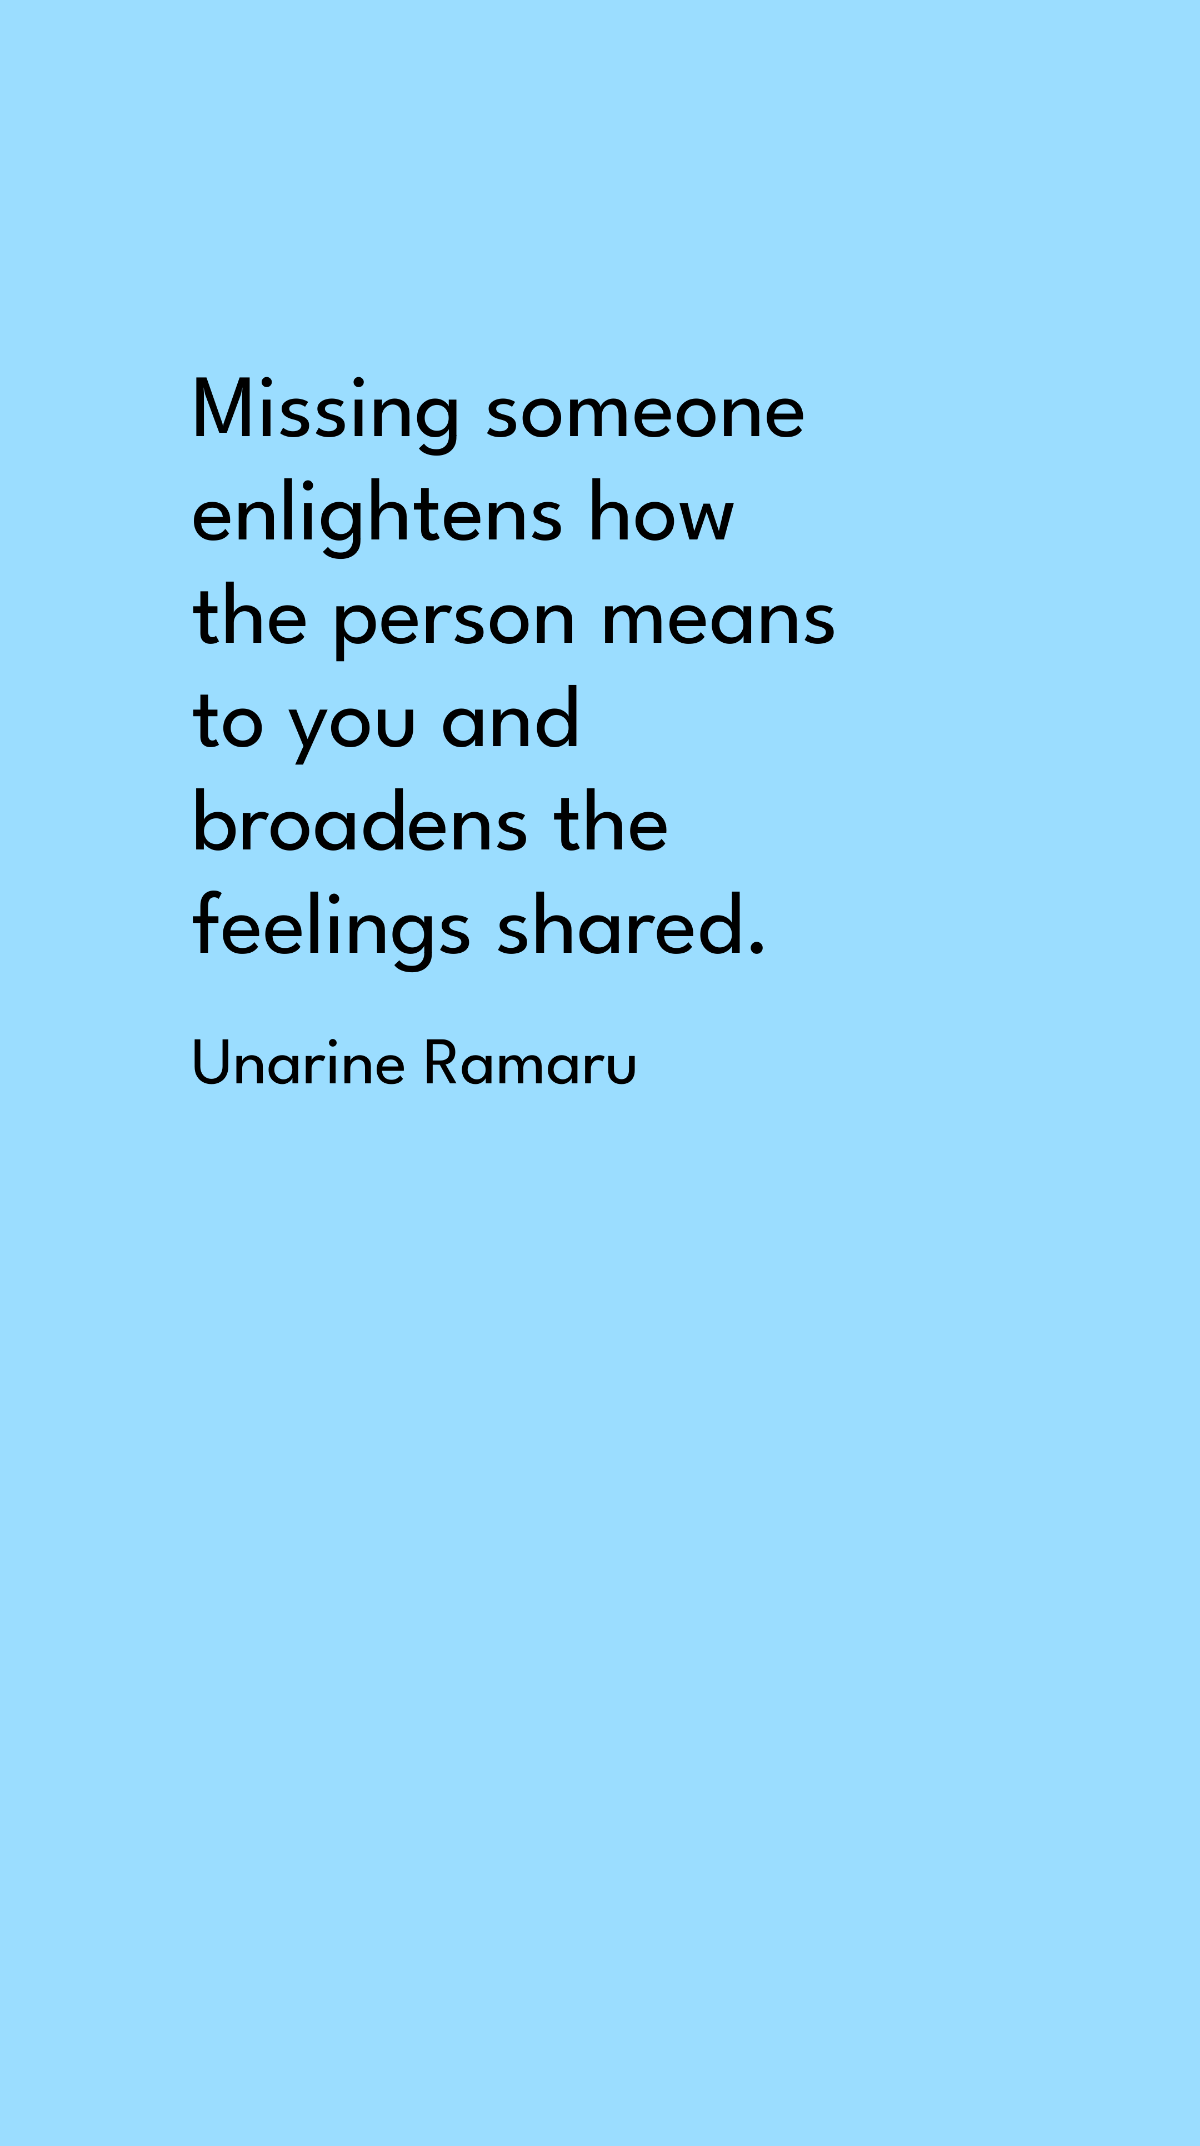 Unarine Ramaru - Missing someone enlightens how the person means to you and broadens the feelings shared. Template